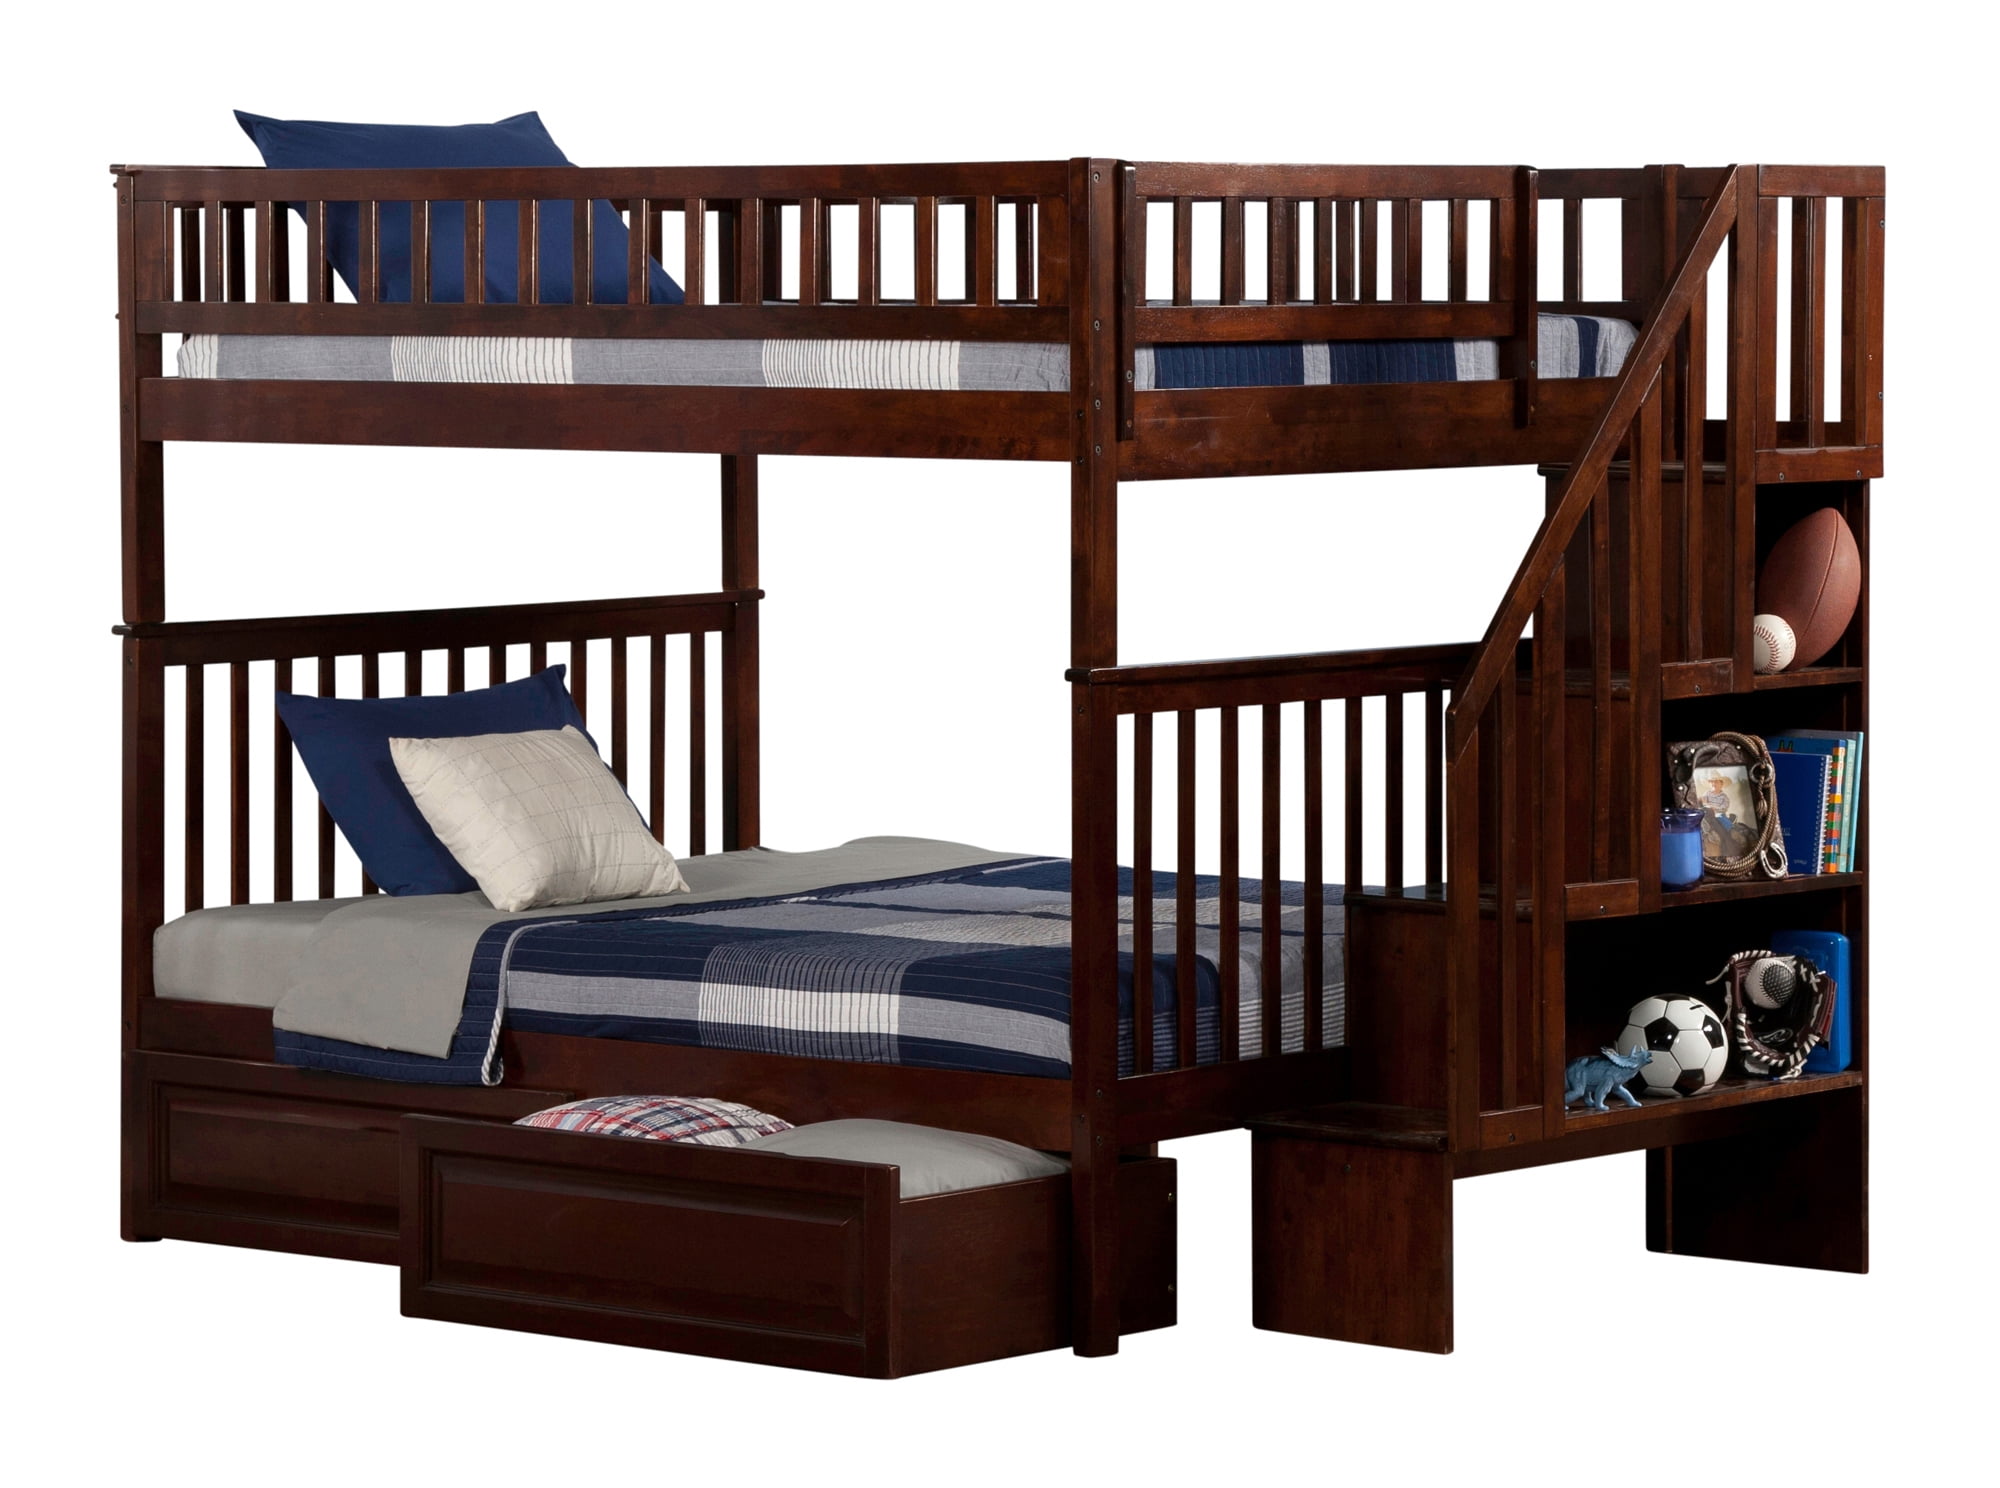 Picture of Atlantic Furniture AB56824 Woodland Staircase Bunk Bed with RPBD, Antique Walnut - Full & Full